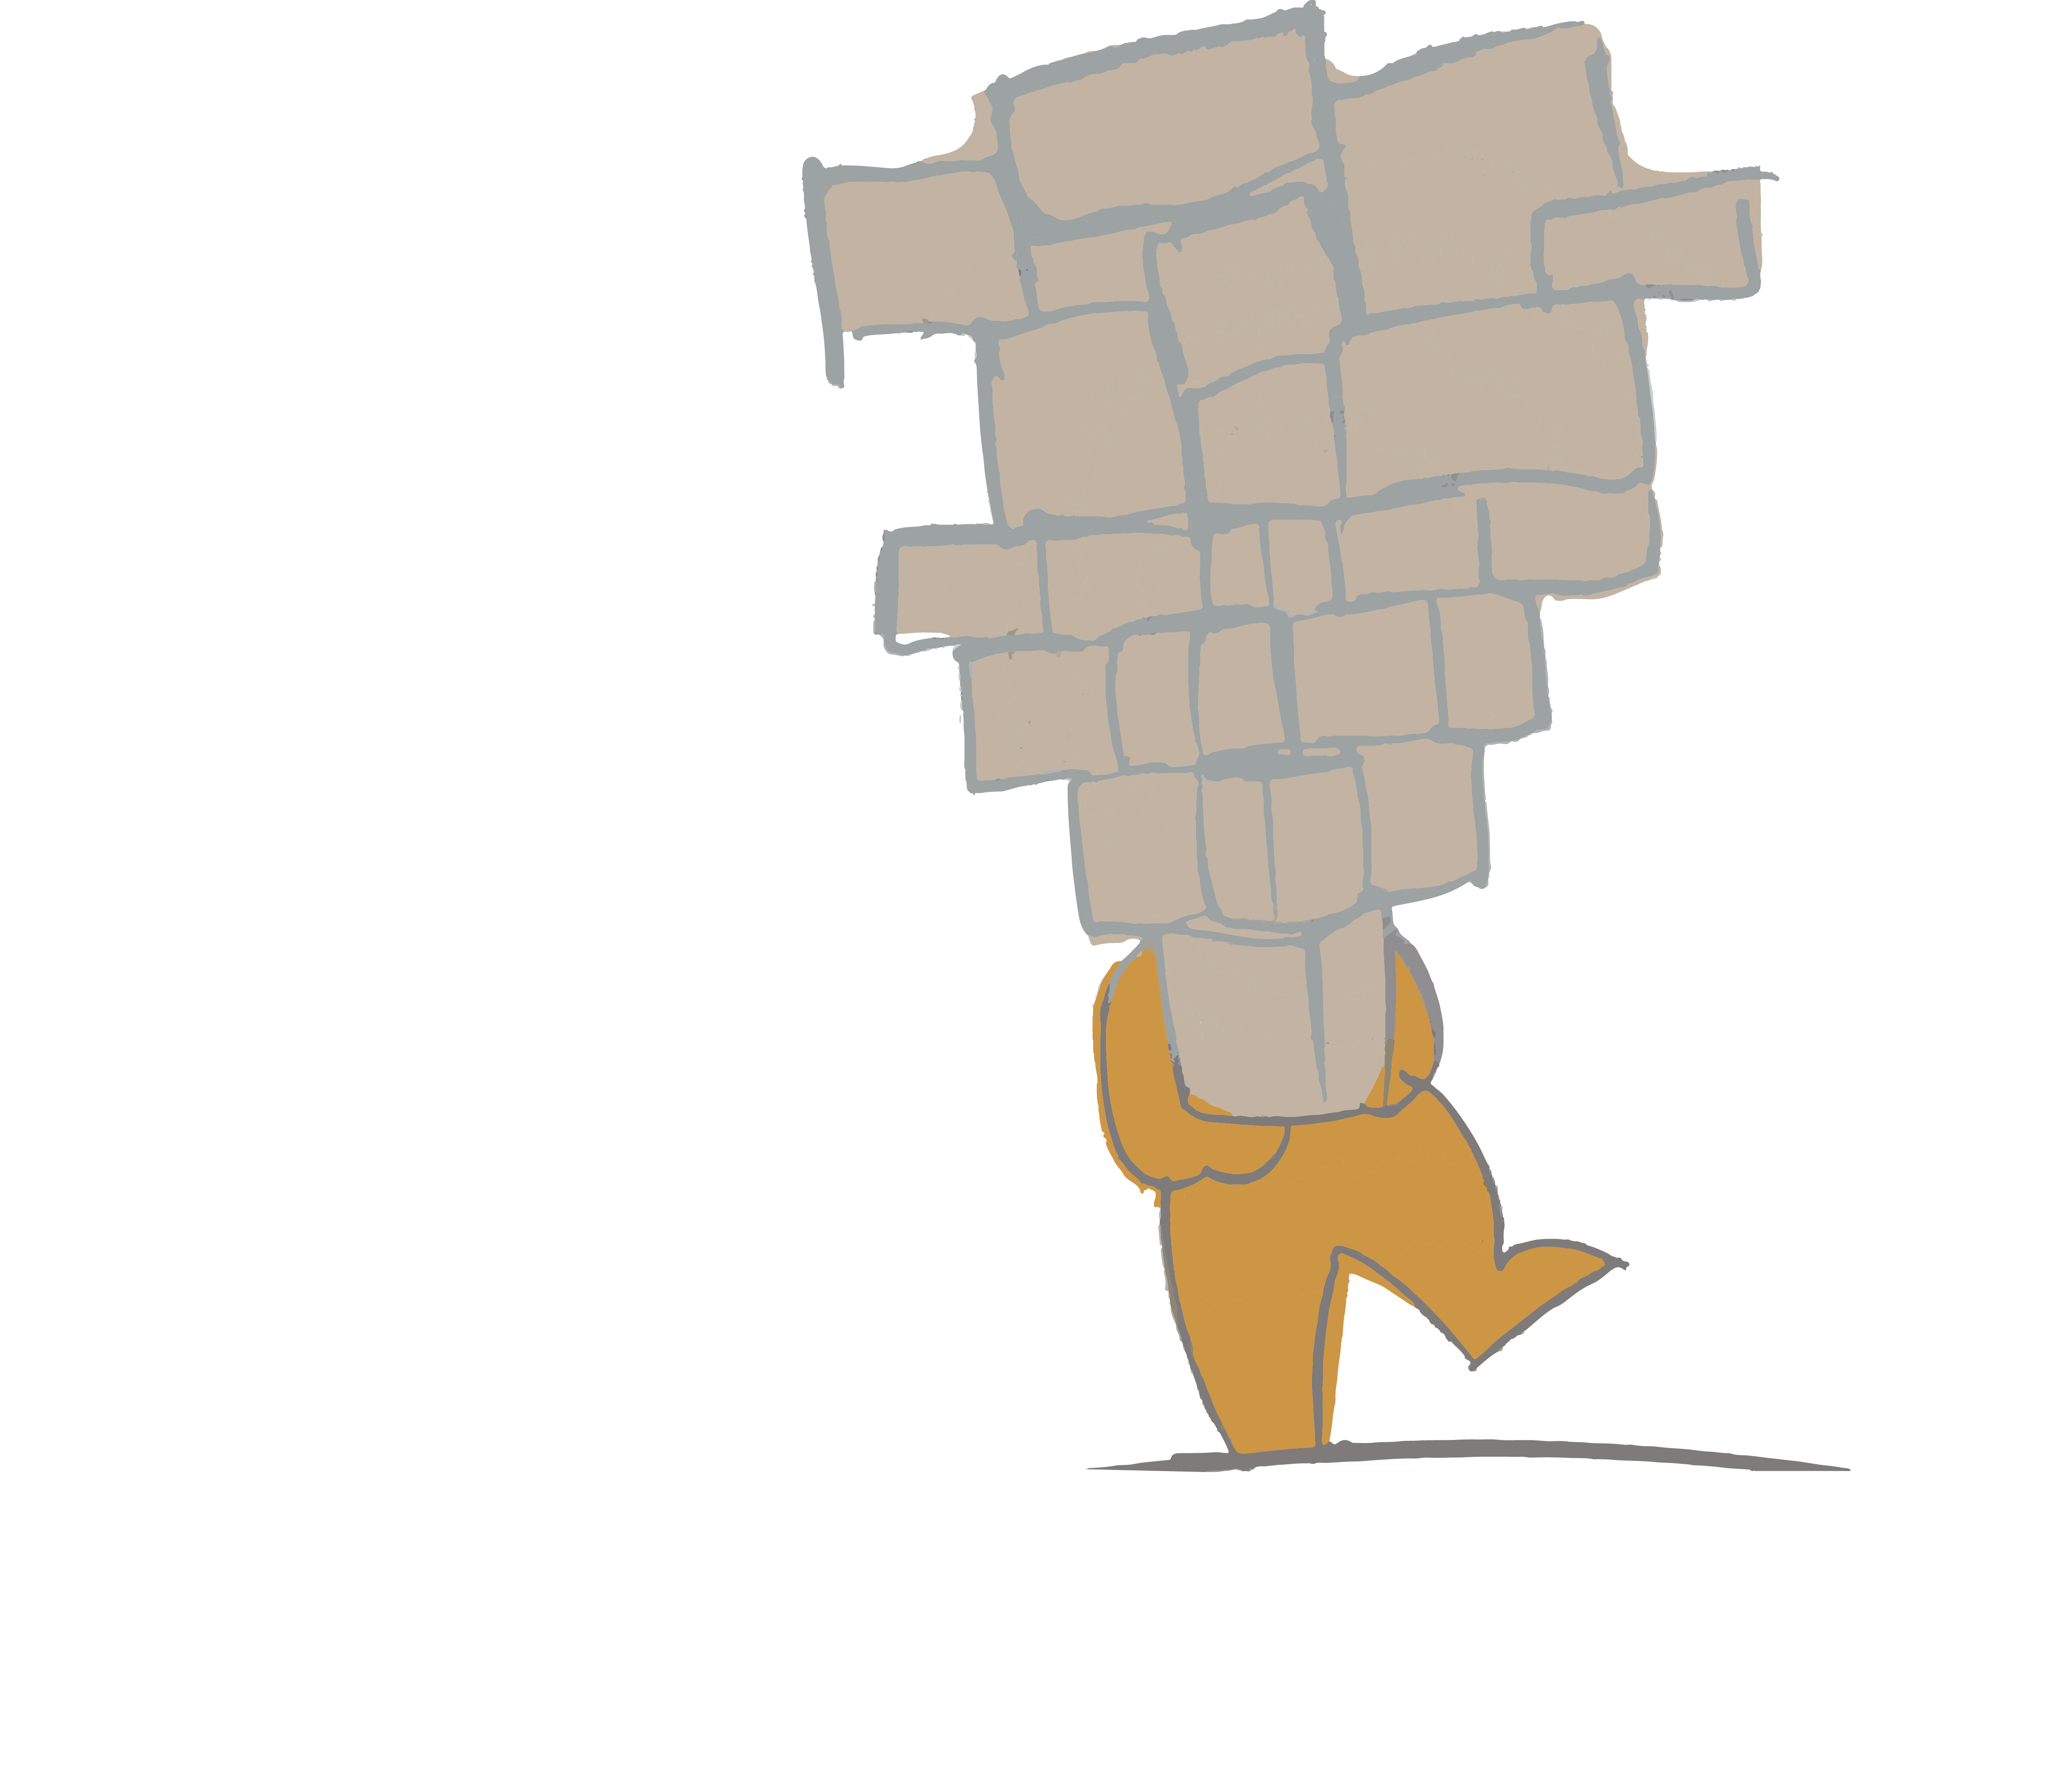 Digital illustration of a person struggling to hold an unequal pile of blocks.